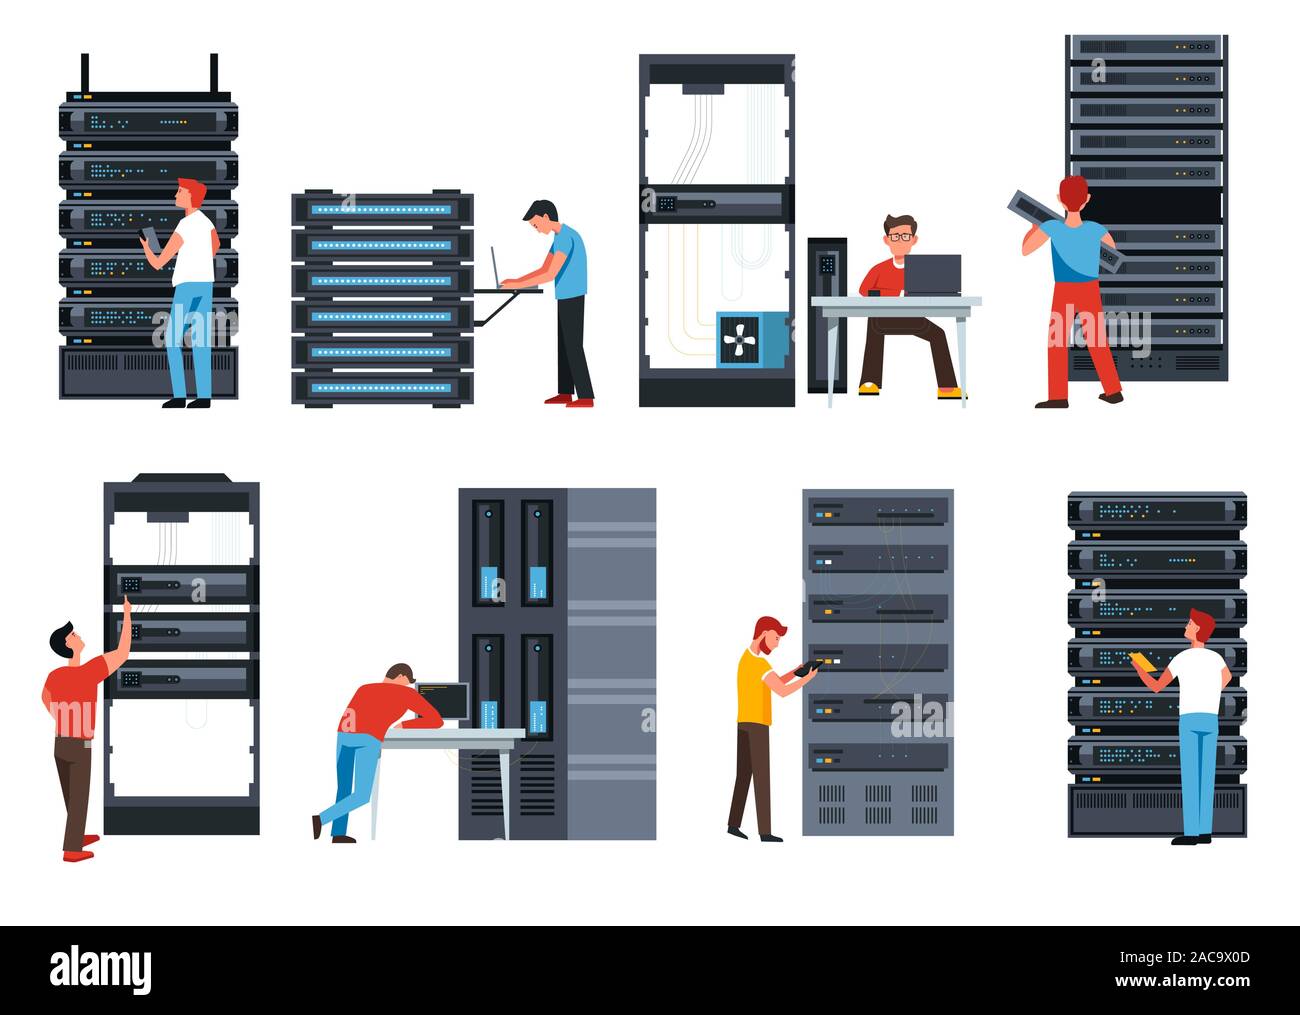 Server racks, digital information and data center isolated icons Stock Vector